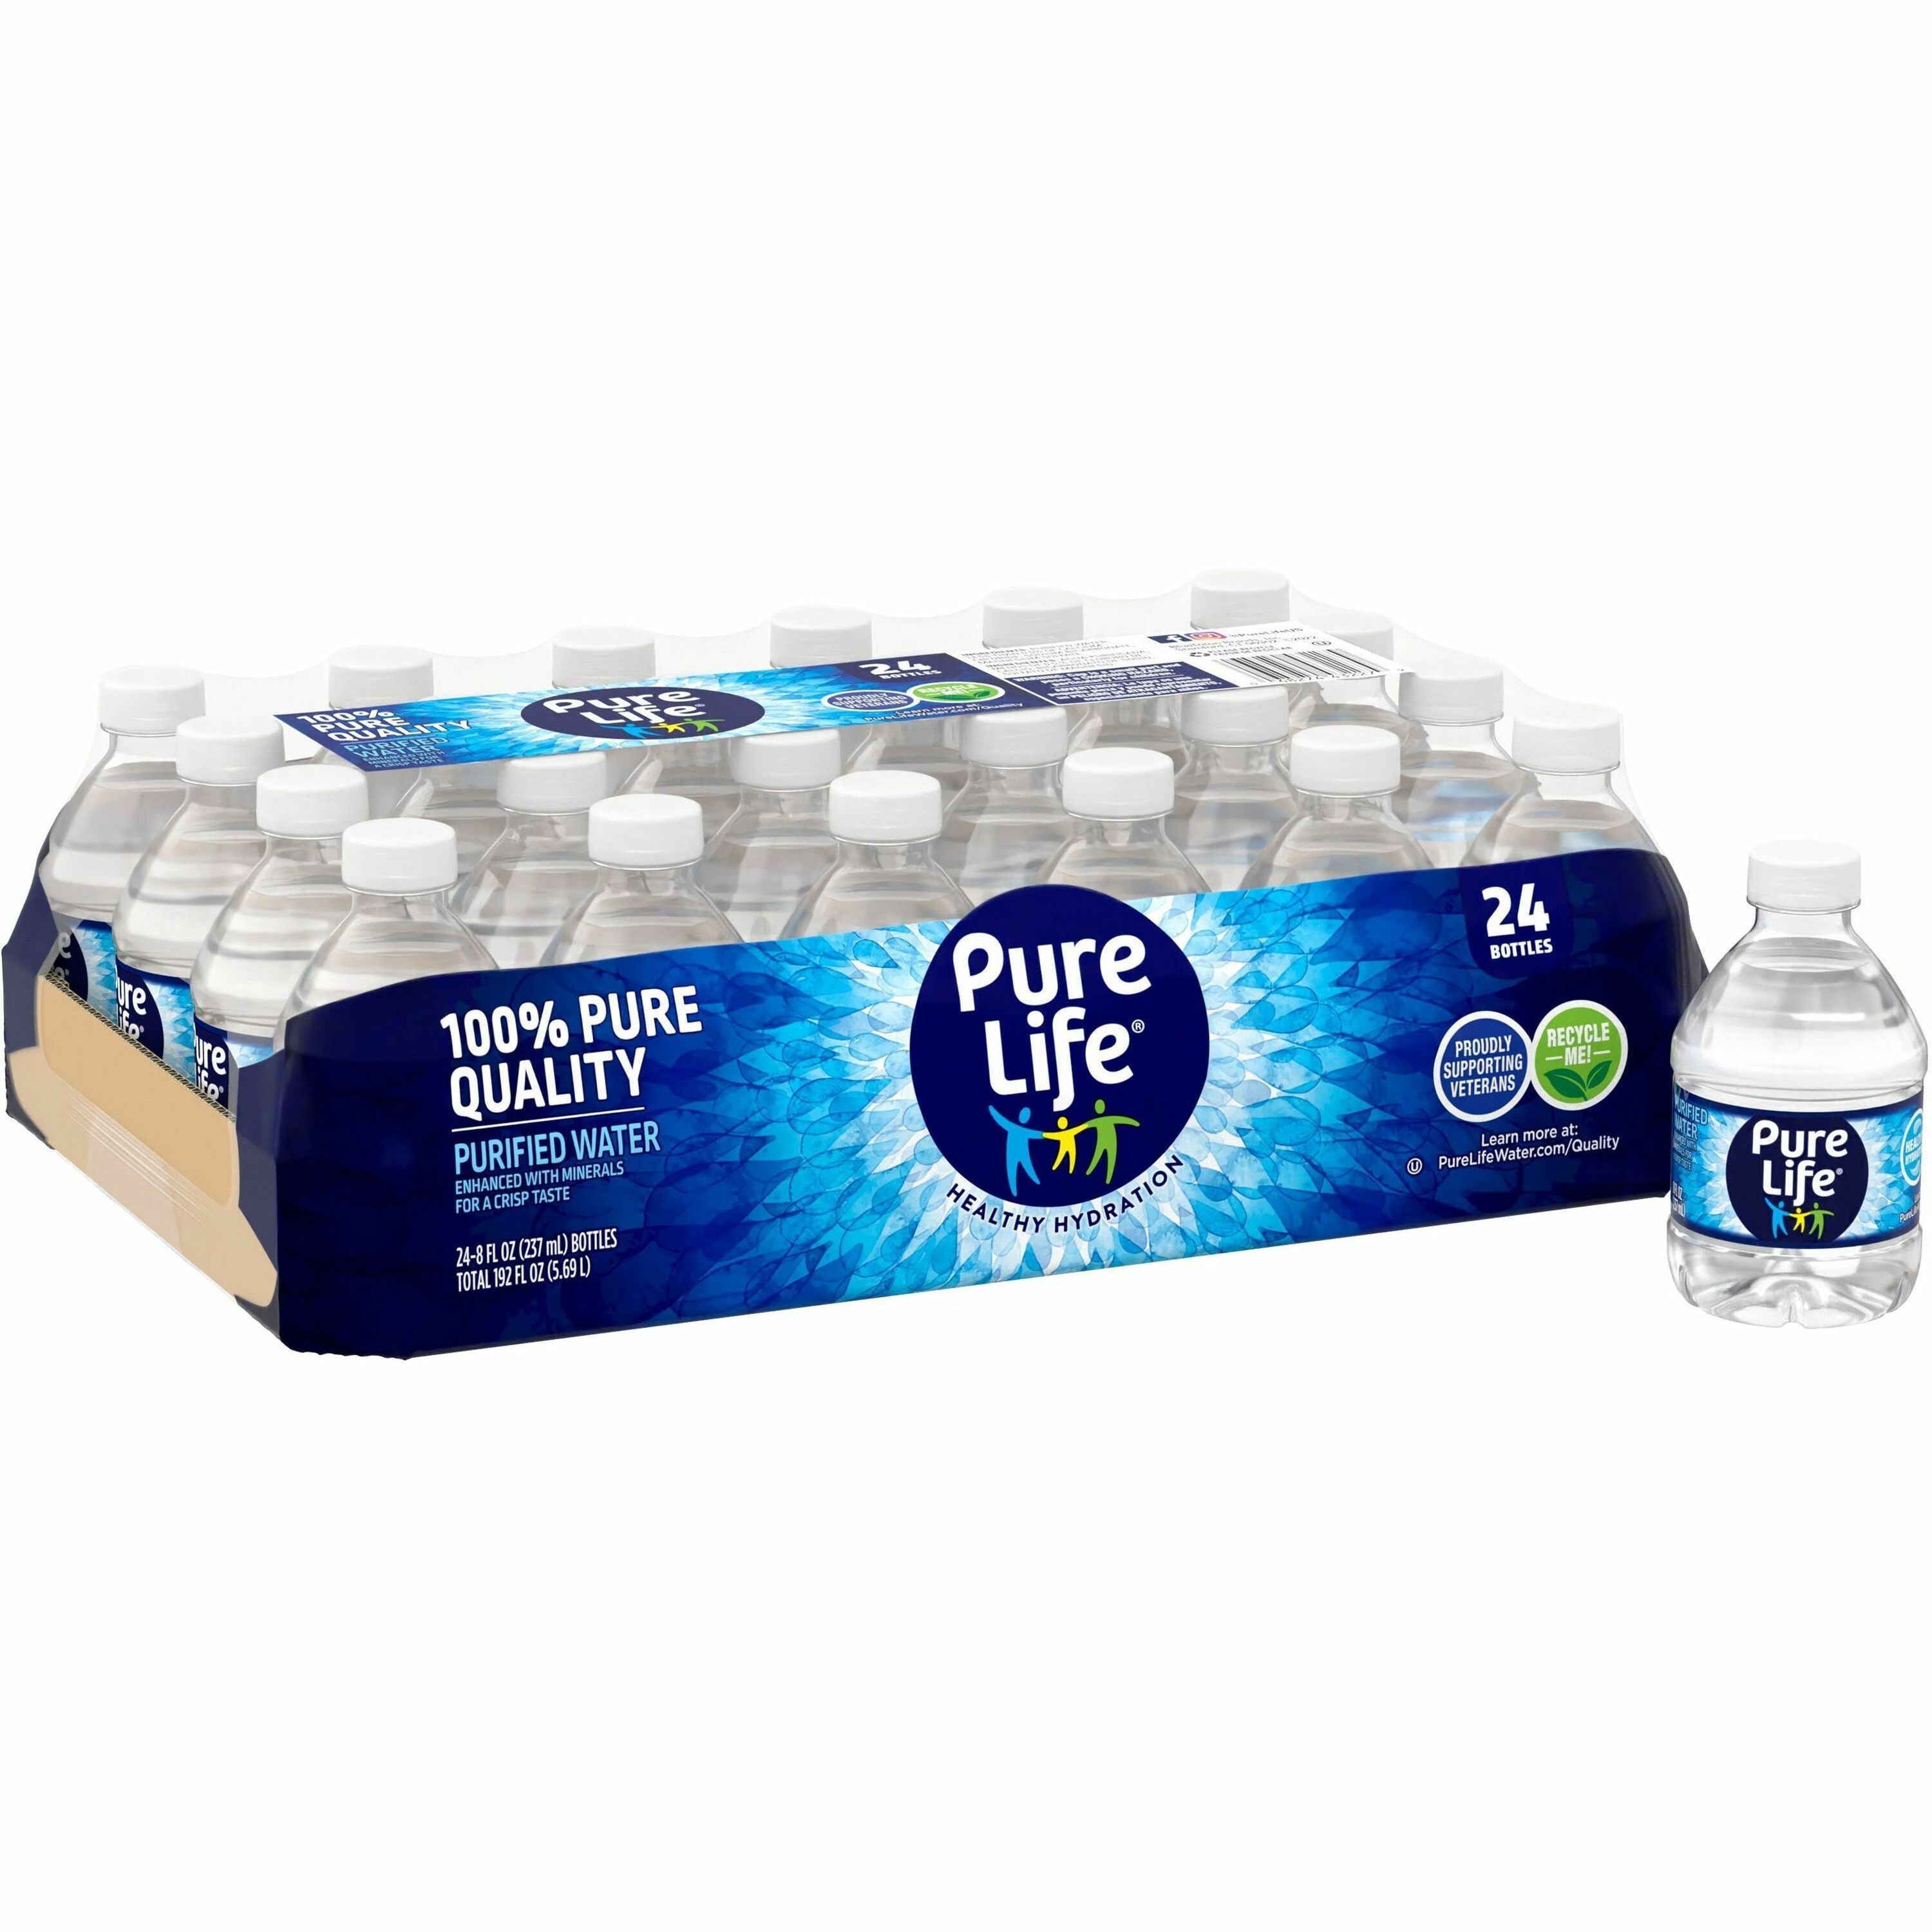 pure-life-purified-bottled-water-ready-to-drink-8-fl-oz-237-ml-bottle-2880-pallet_nle194627pl - 1